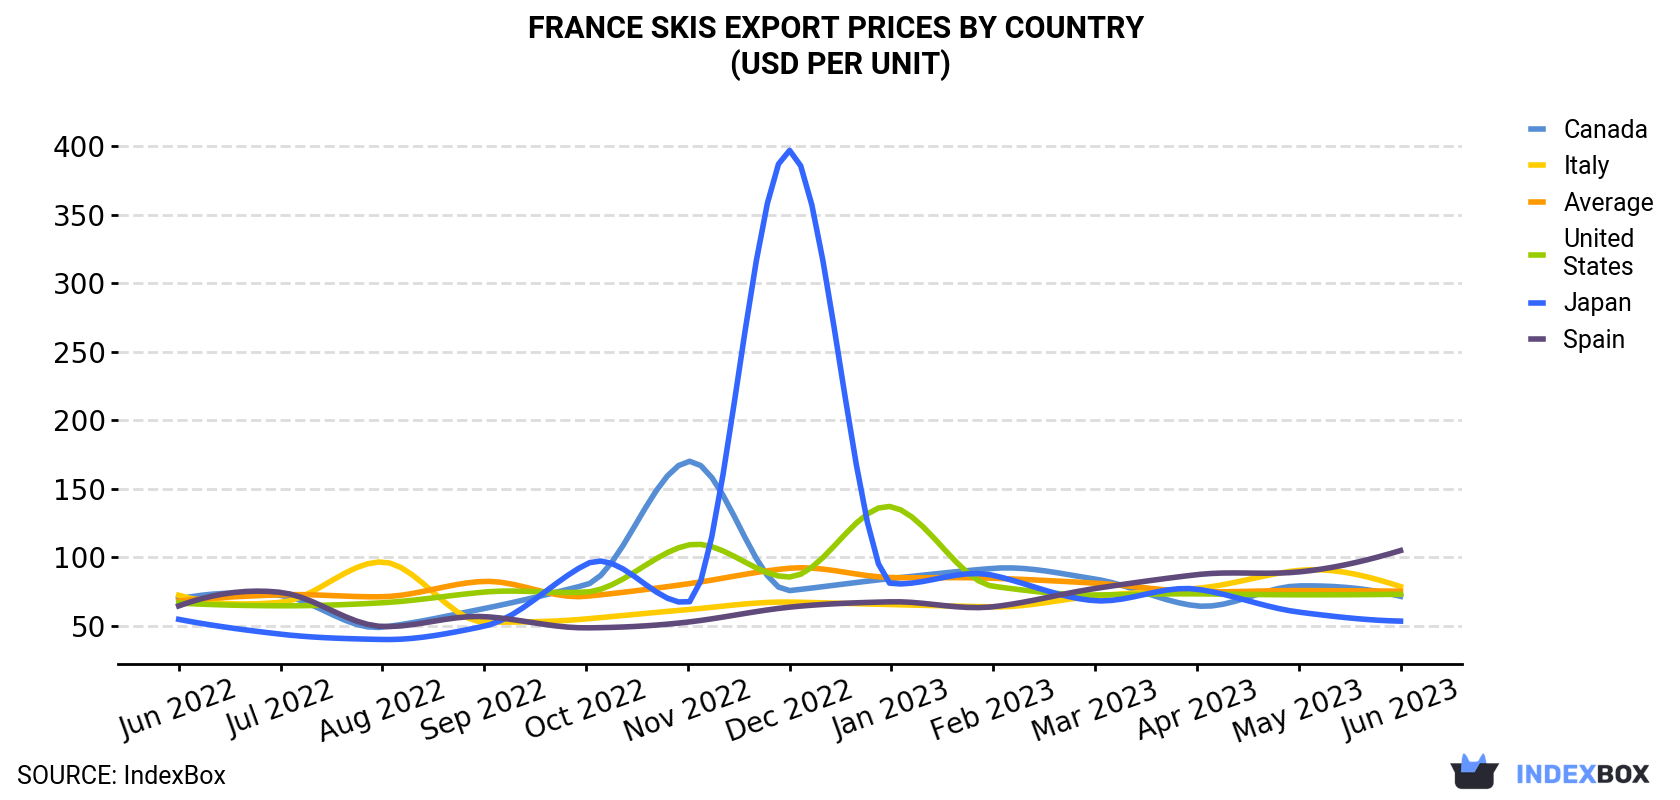 France Skis Export Prices By Country (USD Per Unit)